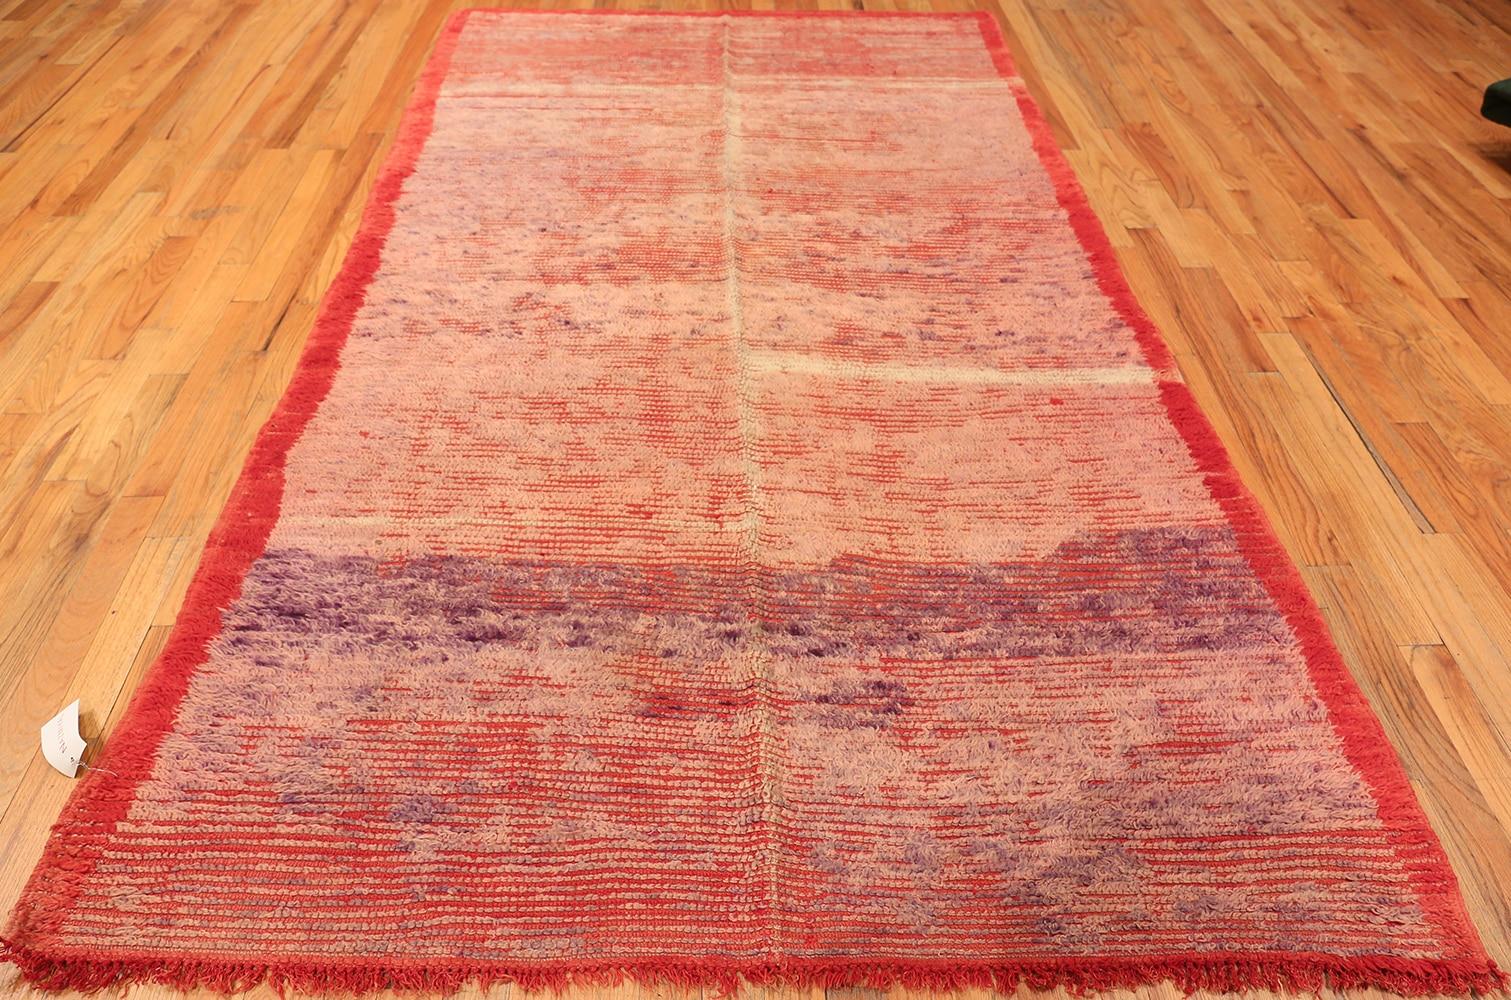 Beautiful Double Sided Vintage Moroccan Red Rug, Country of Origin: Morocco, Circa Date: Mid 20th Century – This striking red rug is vibrant and looks like it could have easily have been created by contemporary artists. However, this rug has